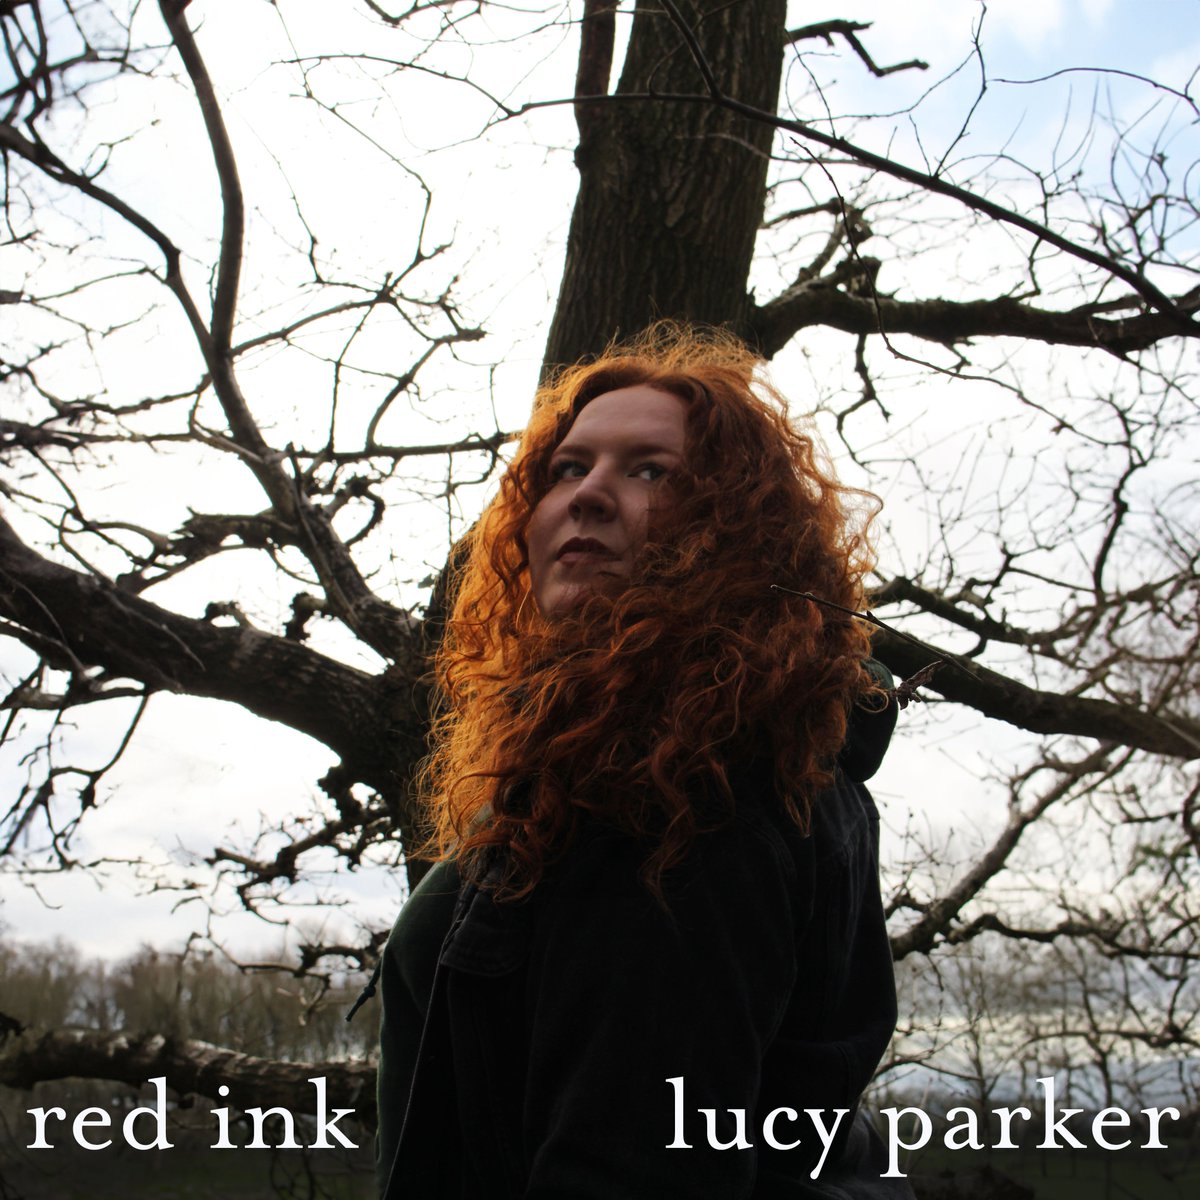 Radio Play The new single ‘Red Ink’ by Lucy Parker was played on this week’s CHBN Playlist Radio Show you can vote for it to be played again next week :- chbnradio.org/on-air/program…